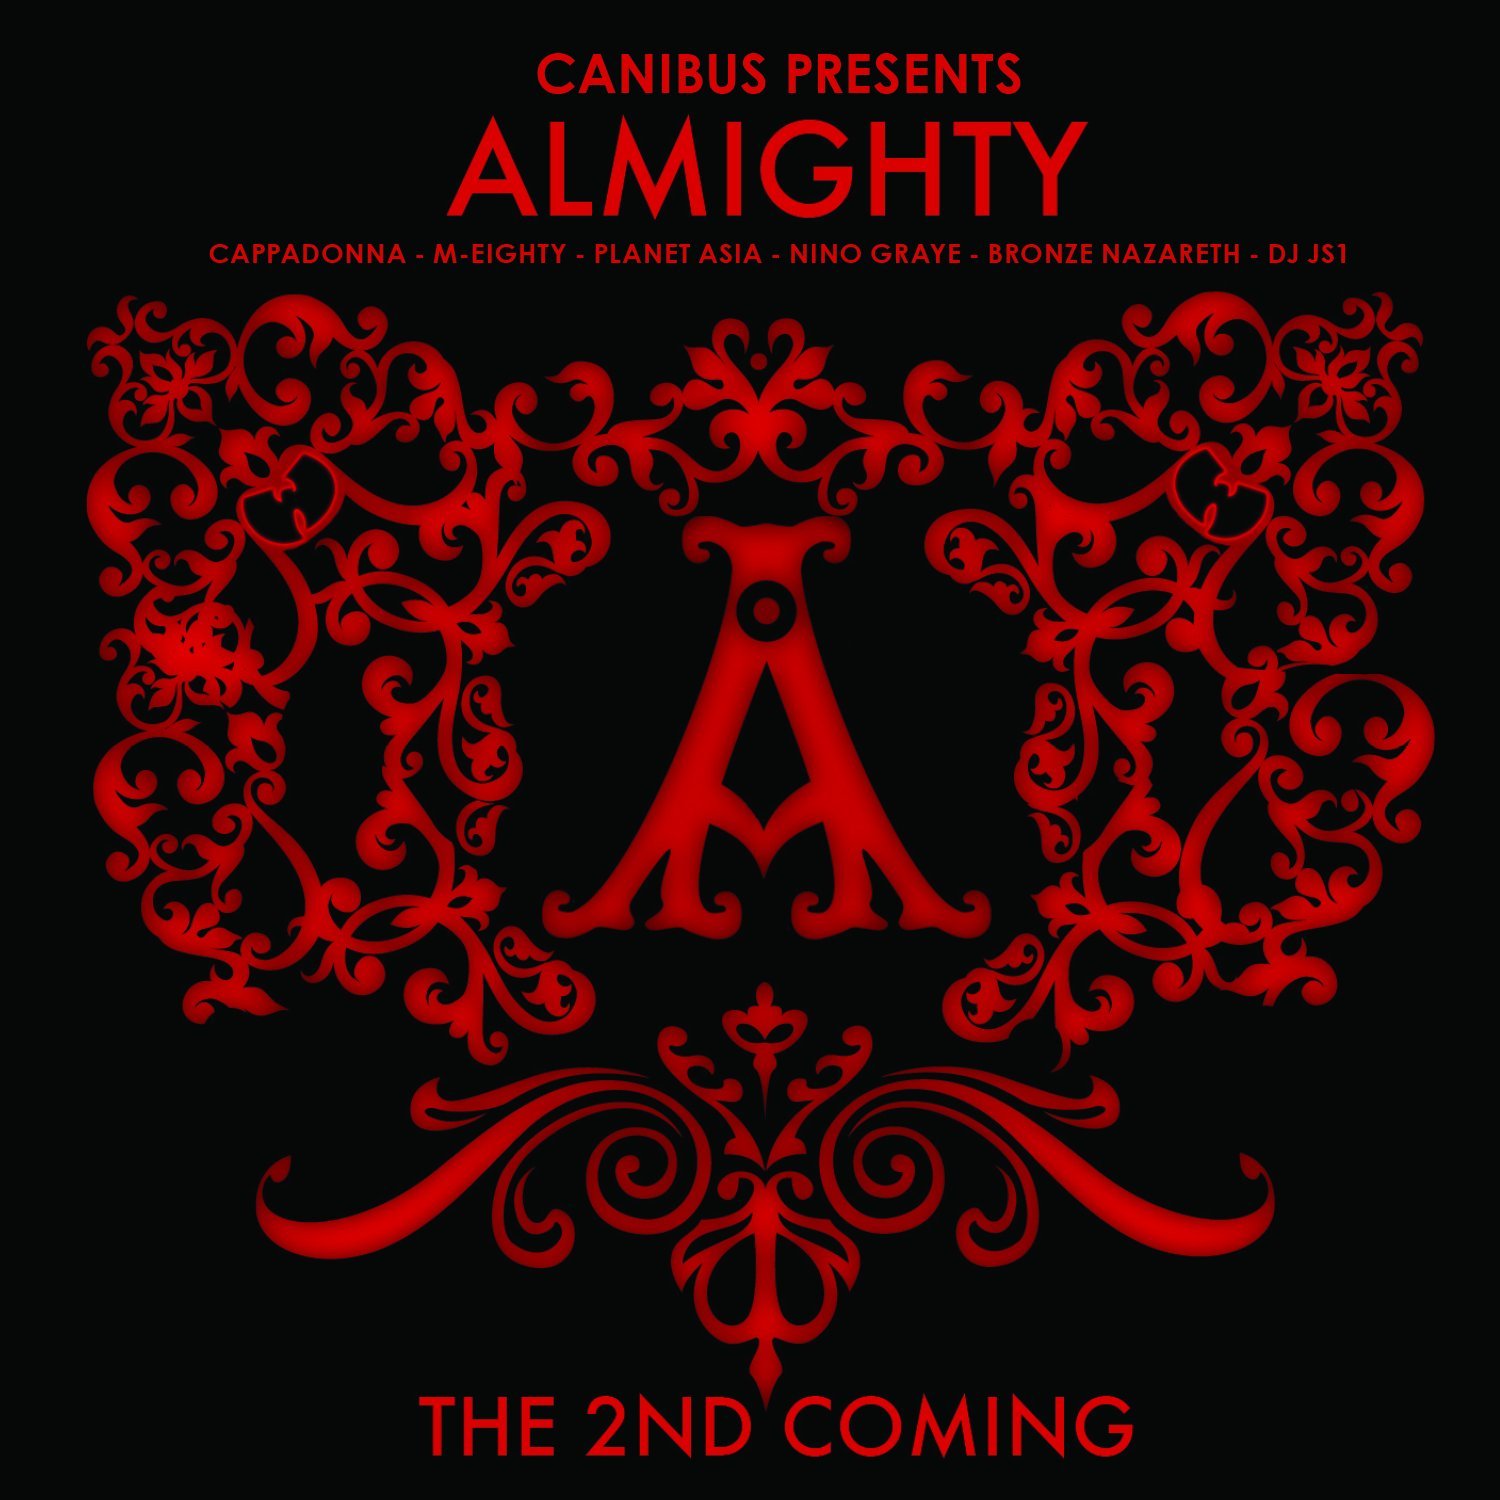 Canibus' Almighty: 2nd Coming